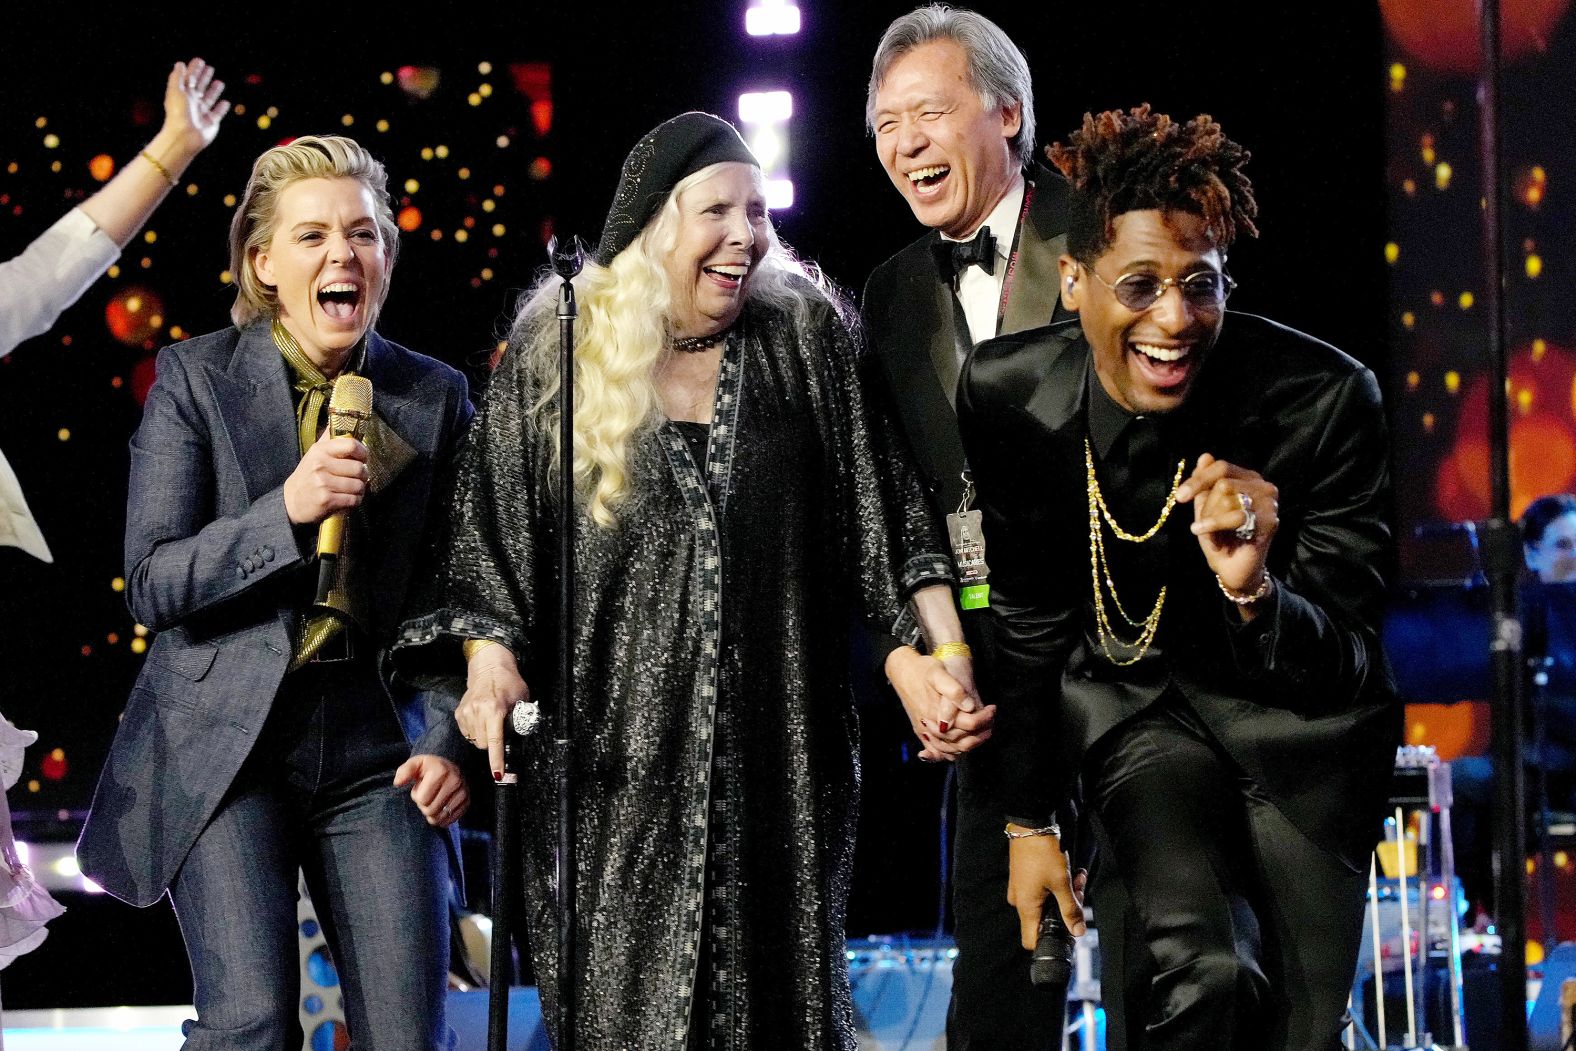 Mitchell joins Brandi Carlile and Jon Batiste on stage during the 2022 MusiCares Person of the Year event honoring Mitchell.